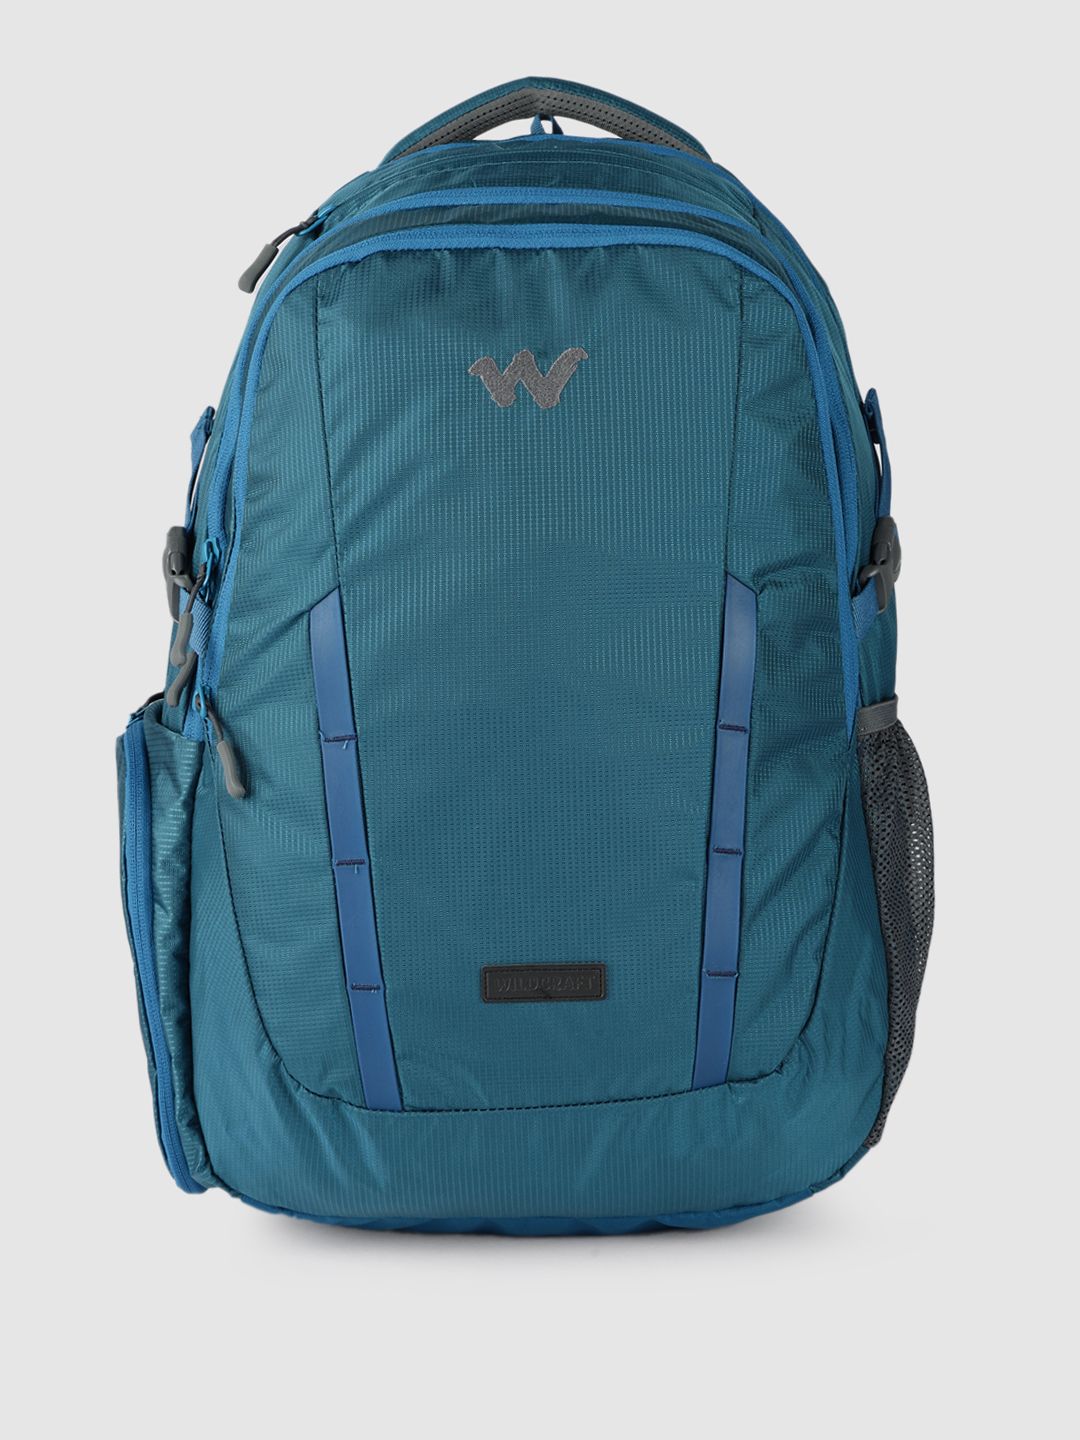 Wildcraft Unisex Blue Continuum 2.0 Backpack with Compression Straps Price in India